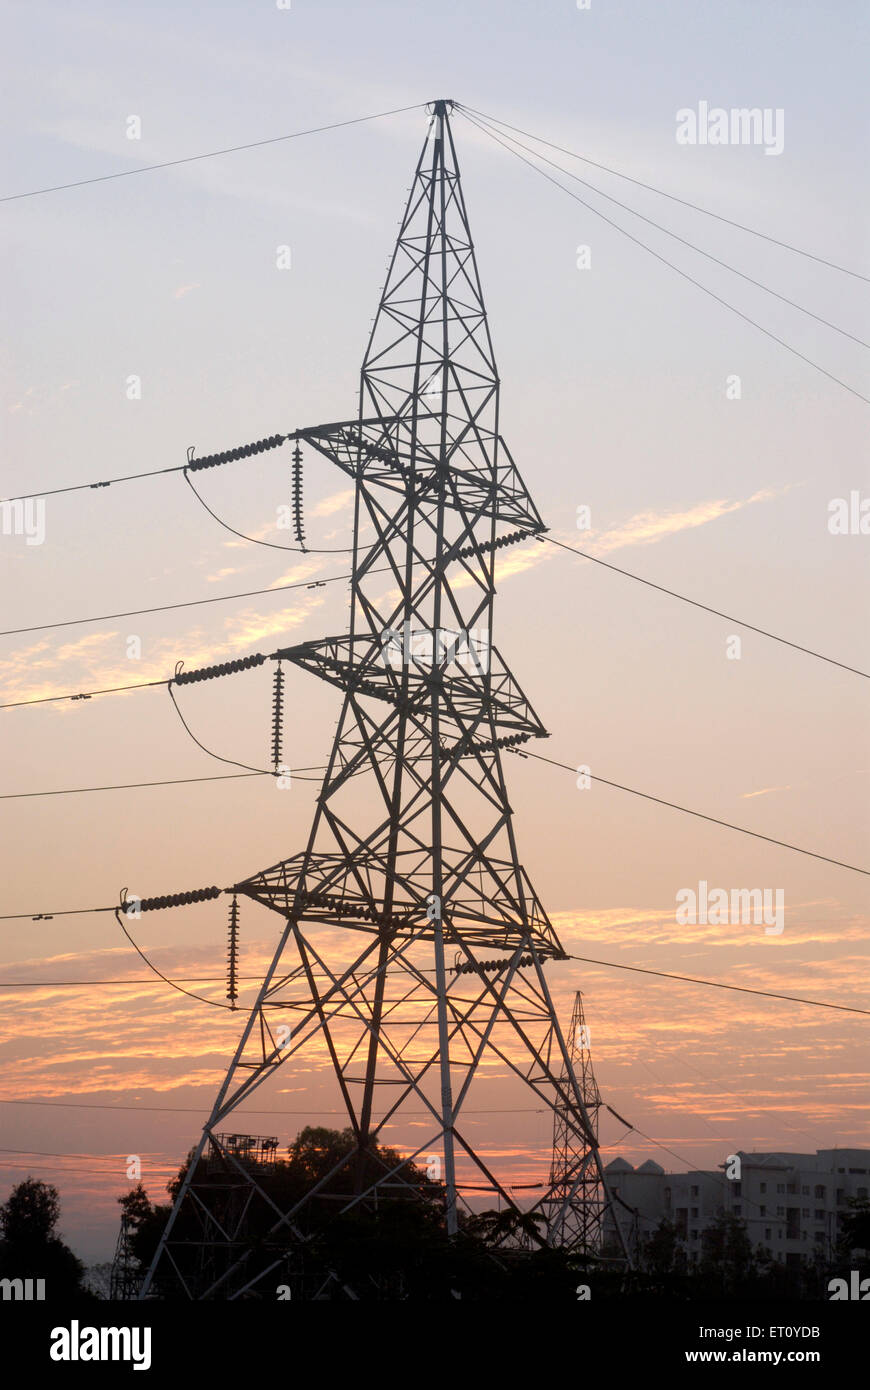 Overhead power lines, high tension wires, transmission tower, India Stock Photo